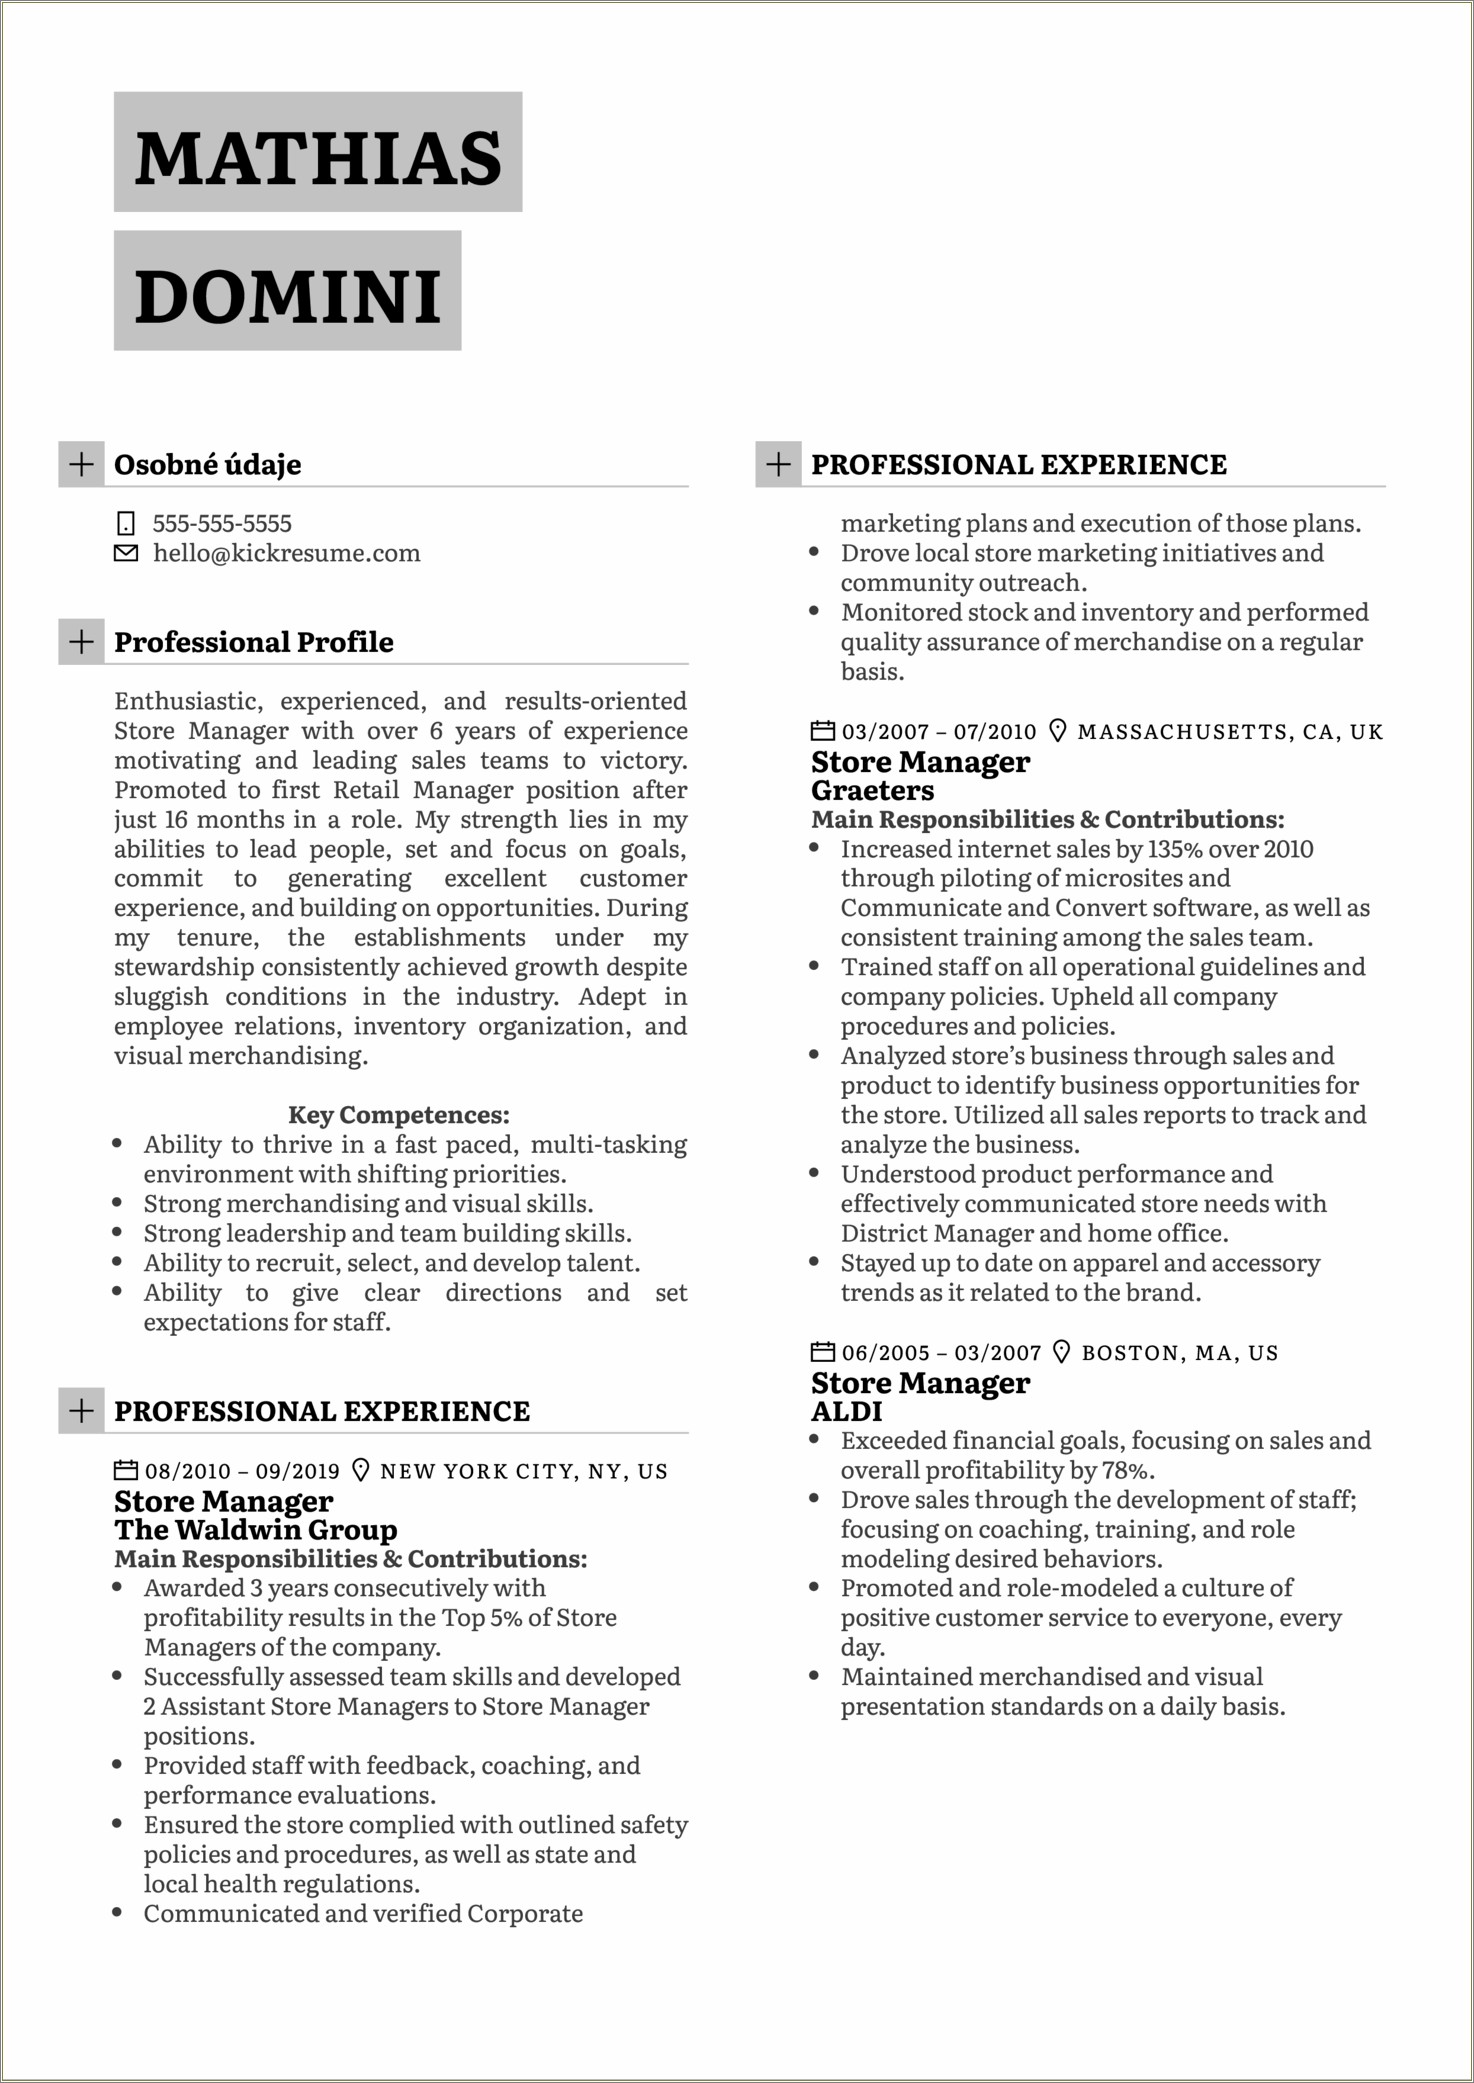 Ability To Take Direction Skill On Resume